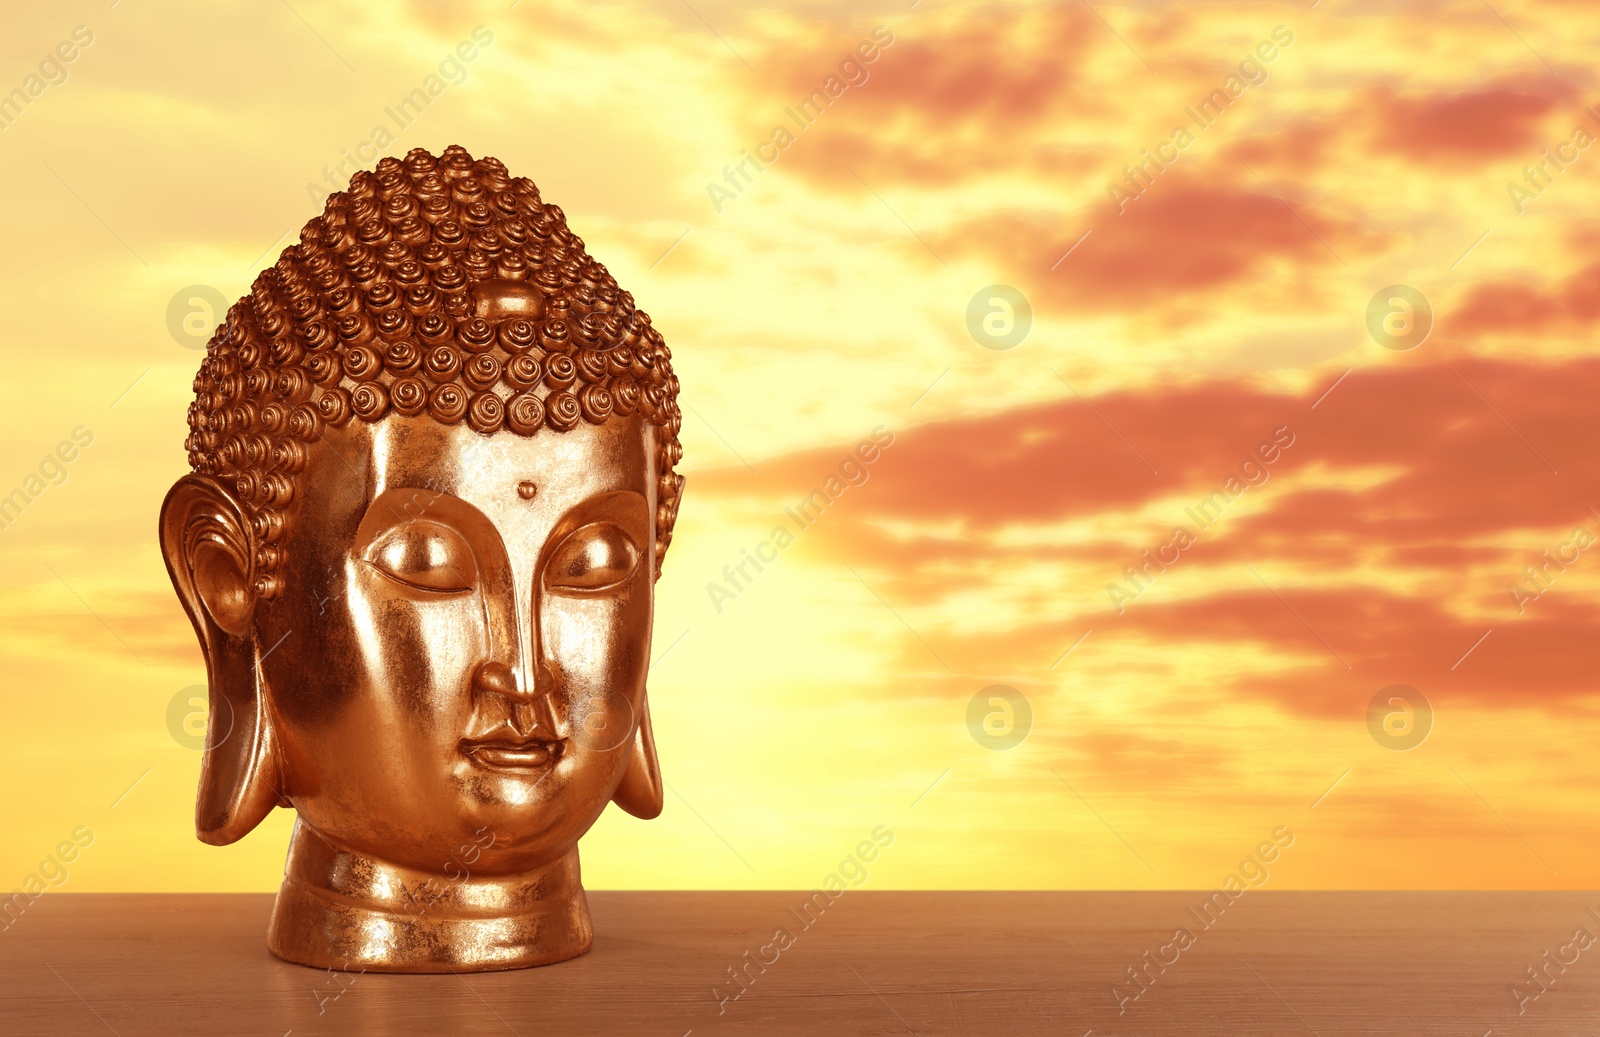 Image of Beautiful golden Buddha sculpture on wooden surface at sunset. Space for text